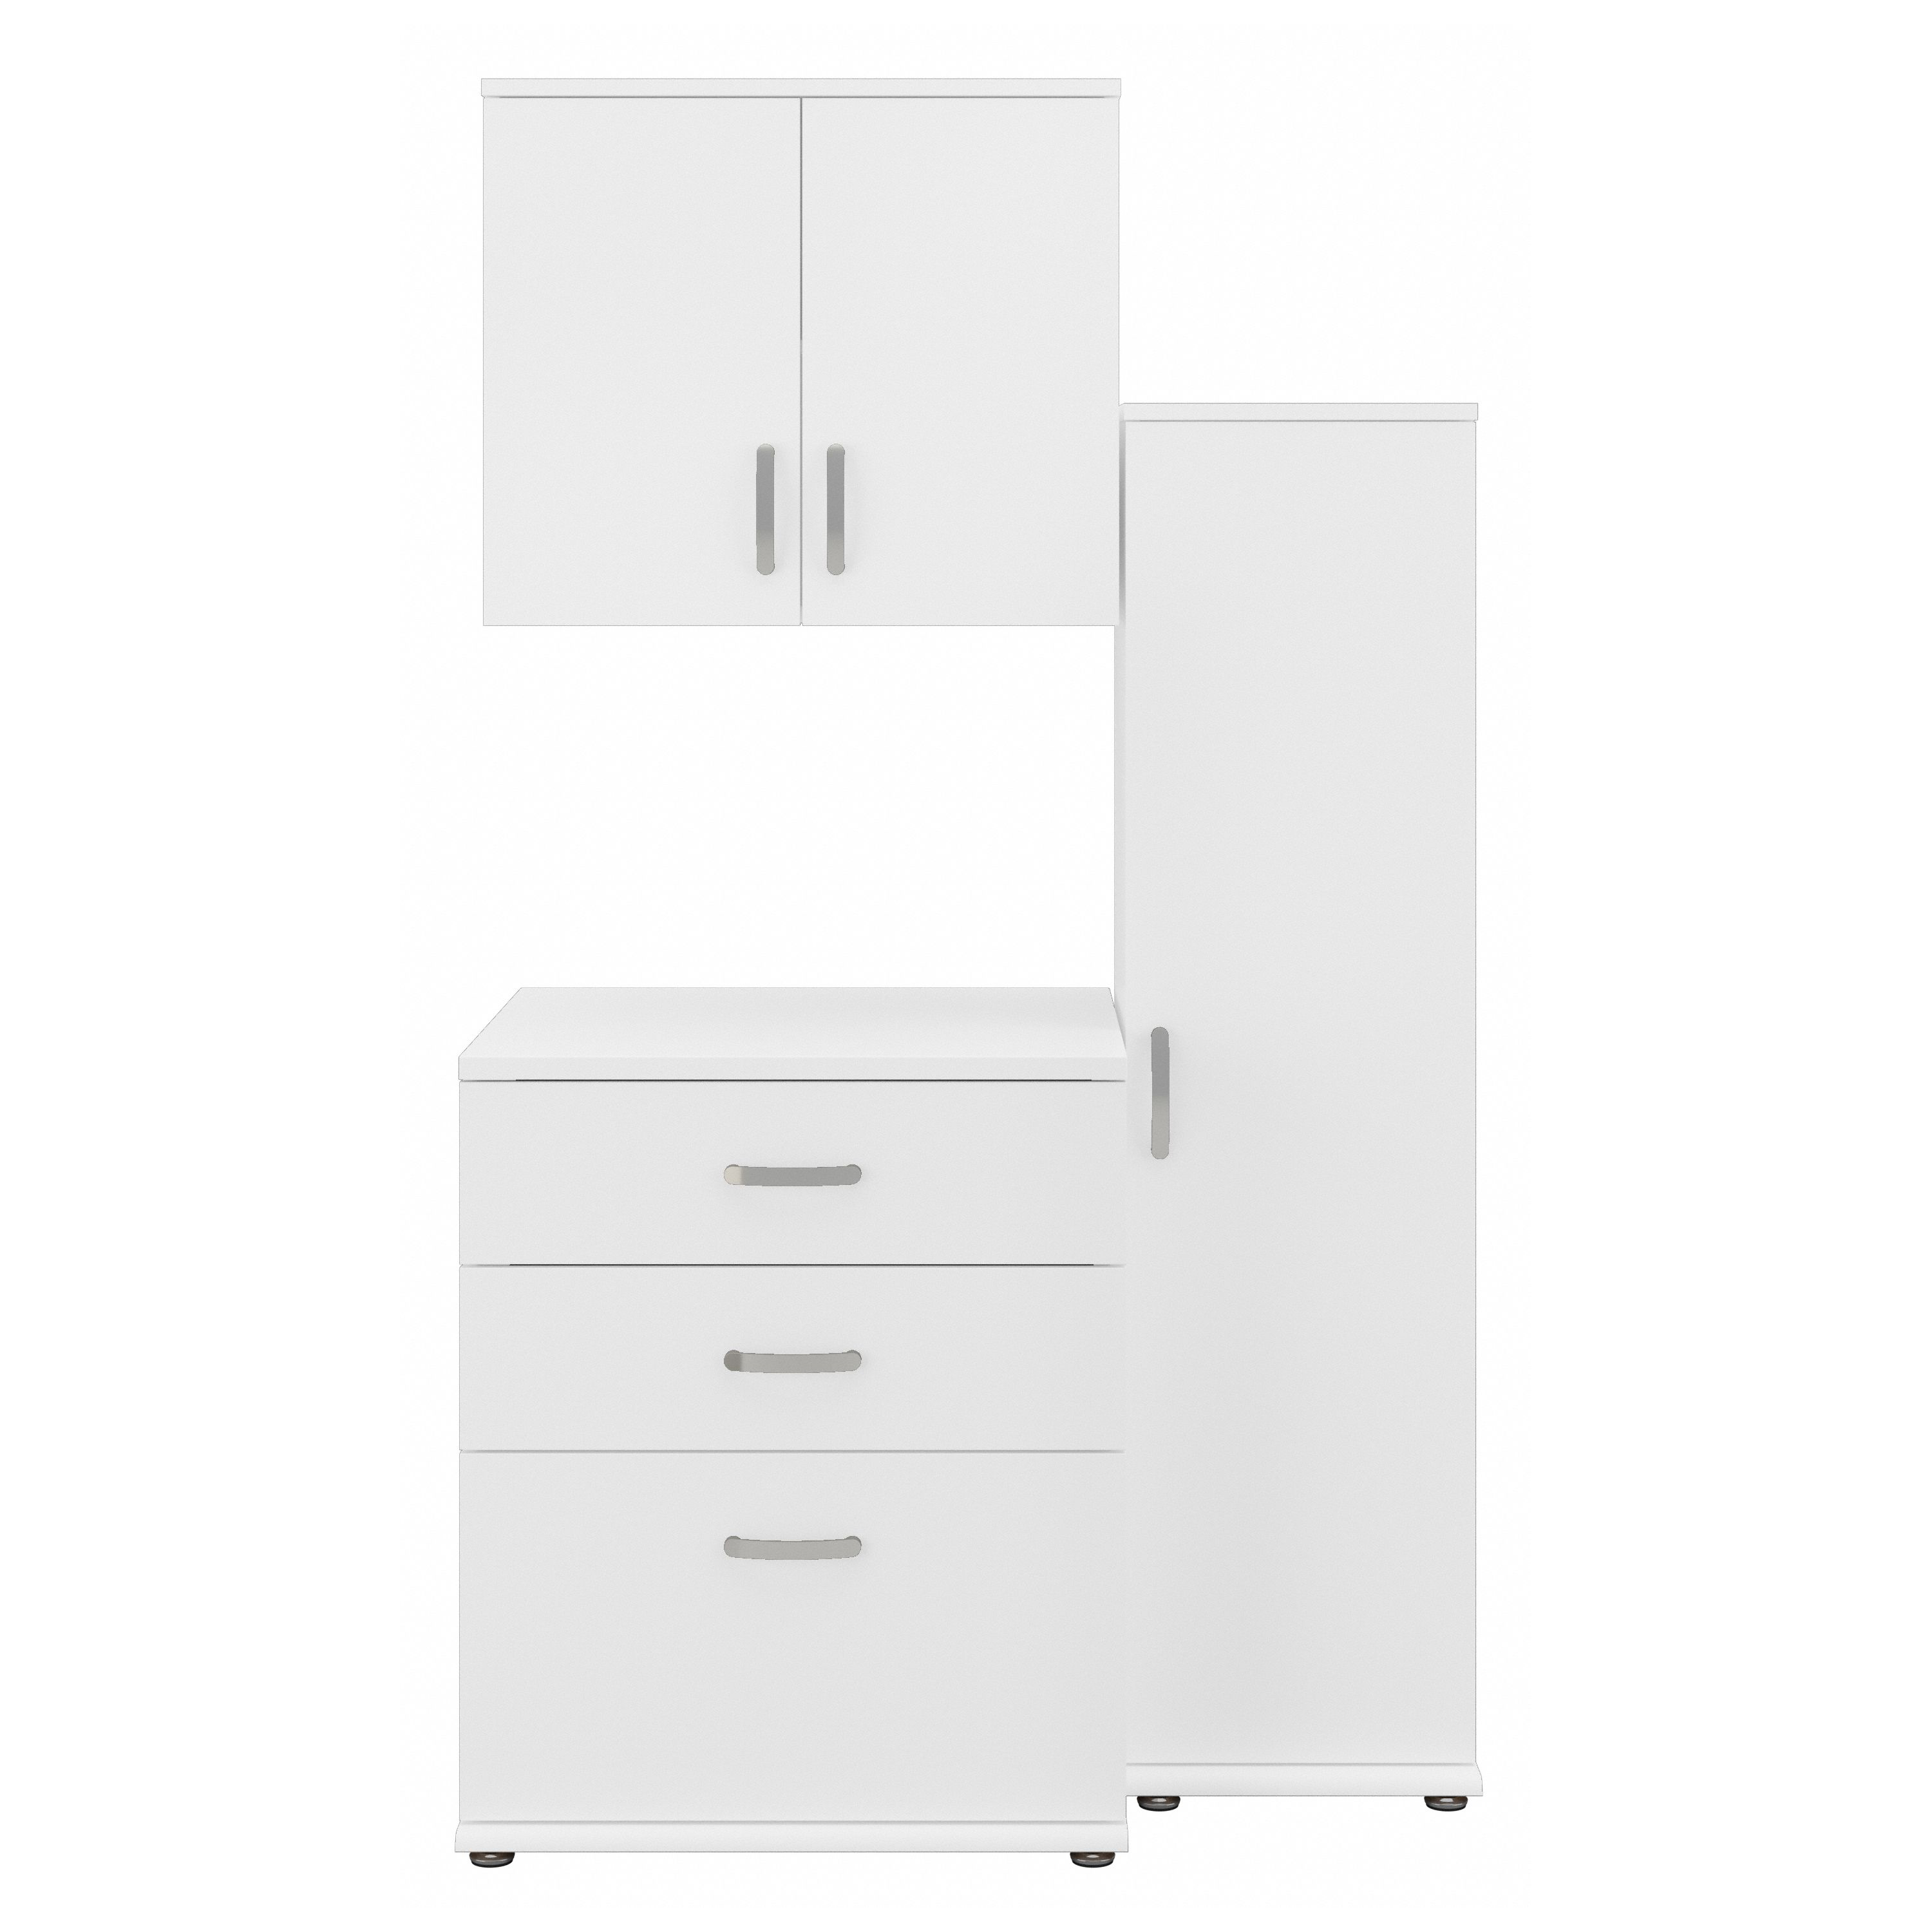 Shop Bush Business Furniture Universal 3 Piece Modular Laundry Room Storage Set with Floor and Wall Cabinets 02 LNS005WH #color_white